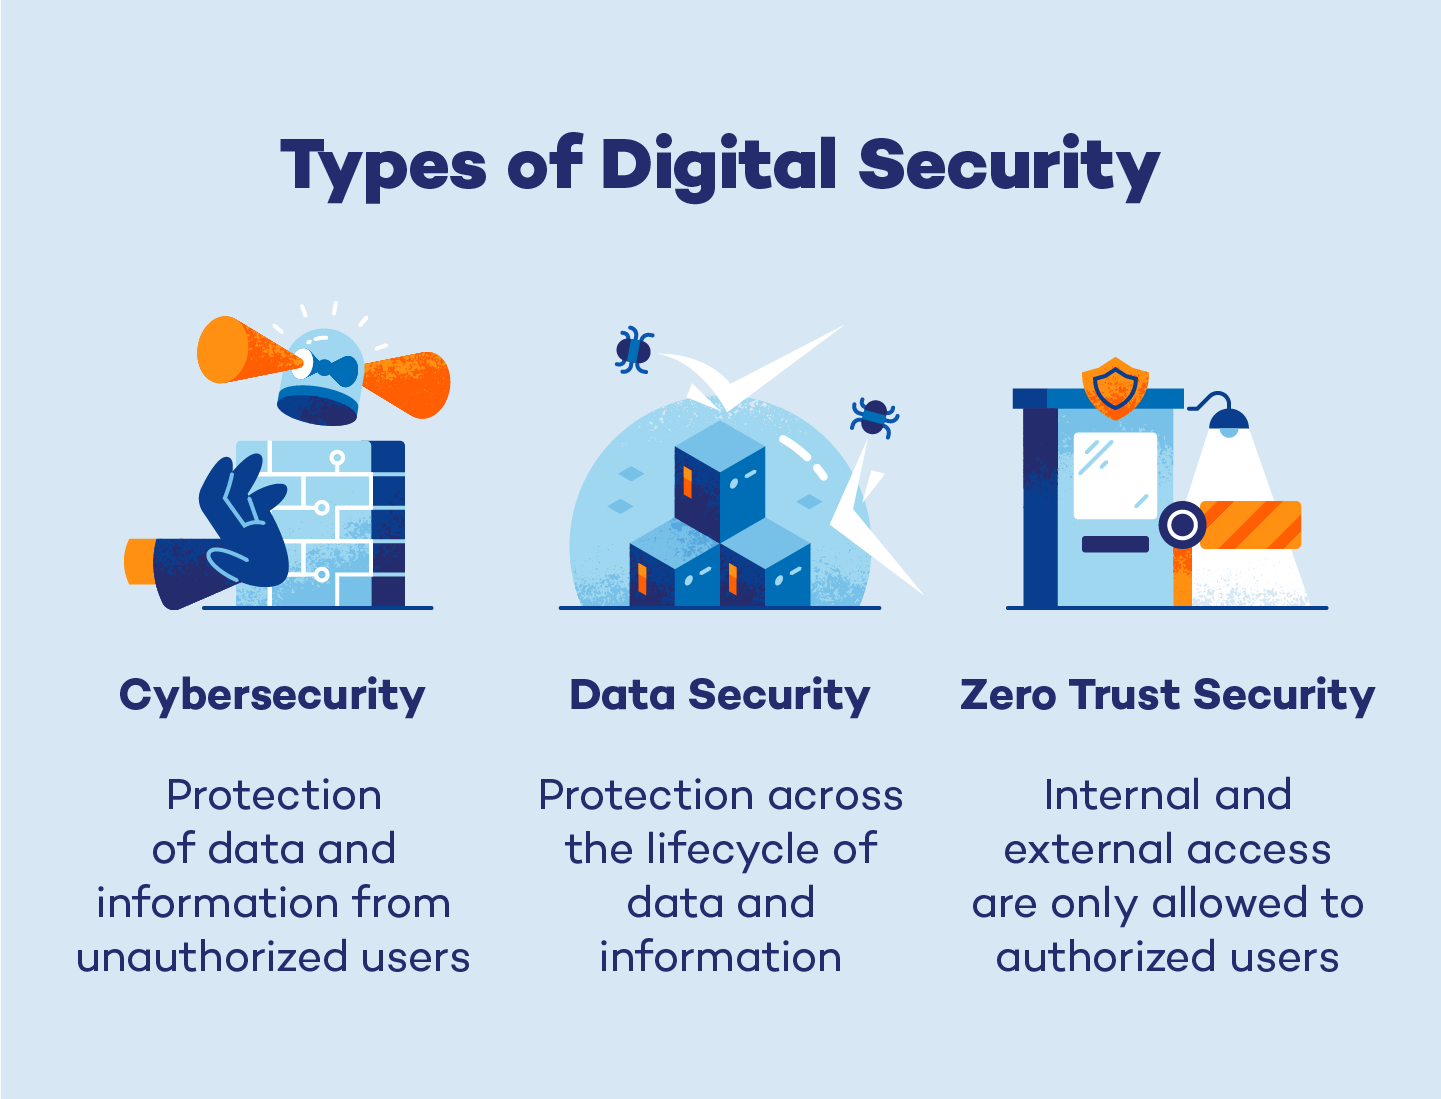 Cybersecurity, data security, and zero trust security are three types of digital security.